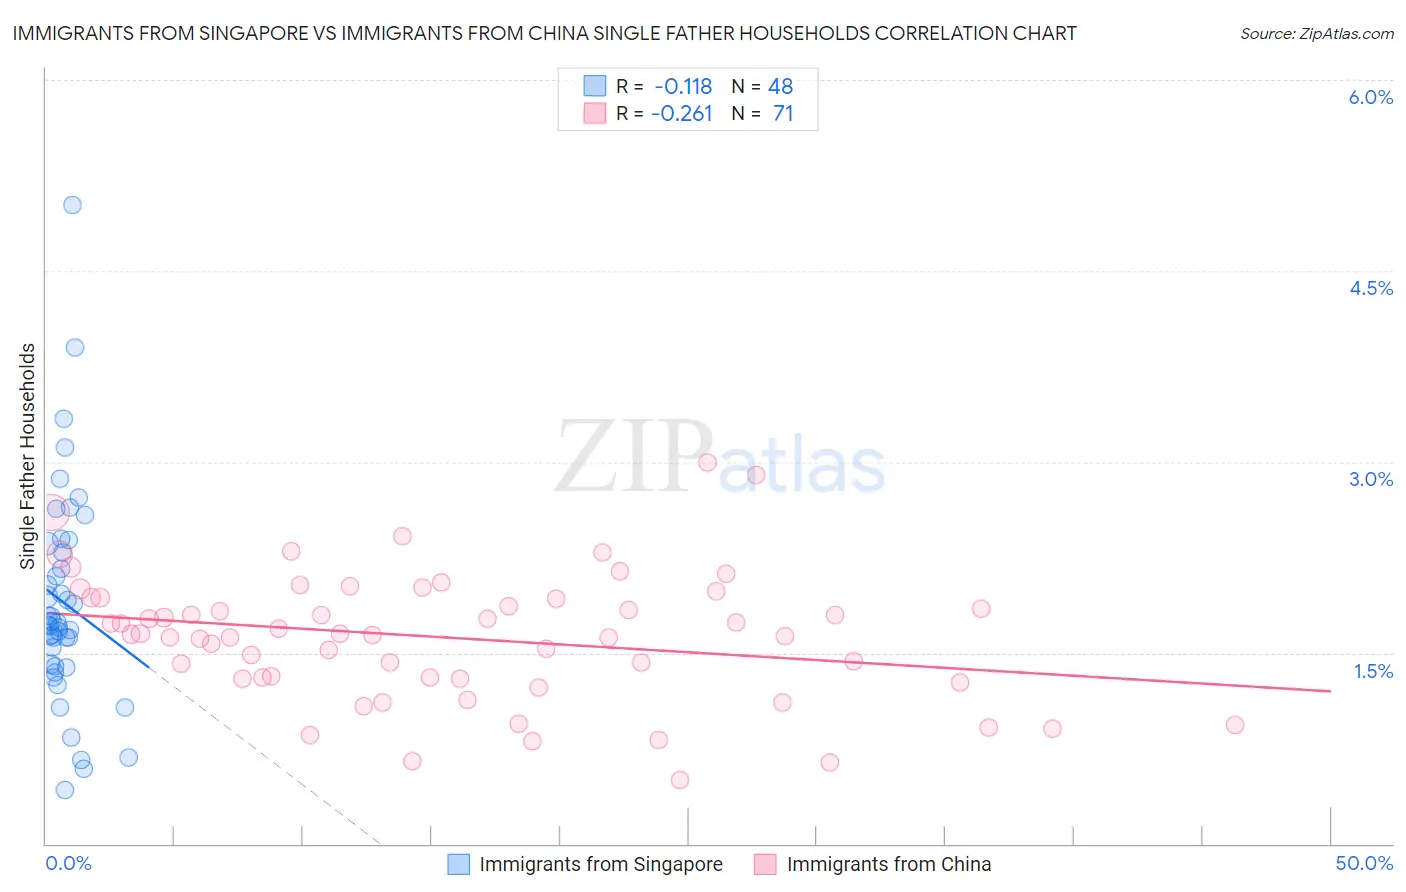 Immigrants from Singapore vs Immigrants from China Single Father Households